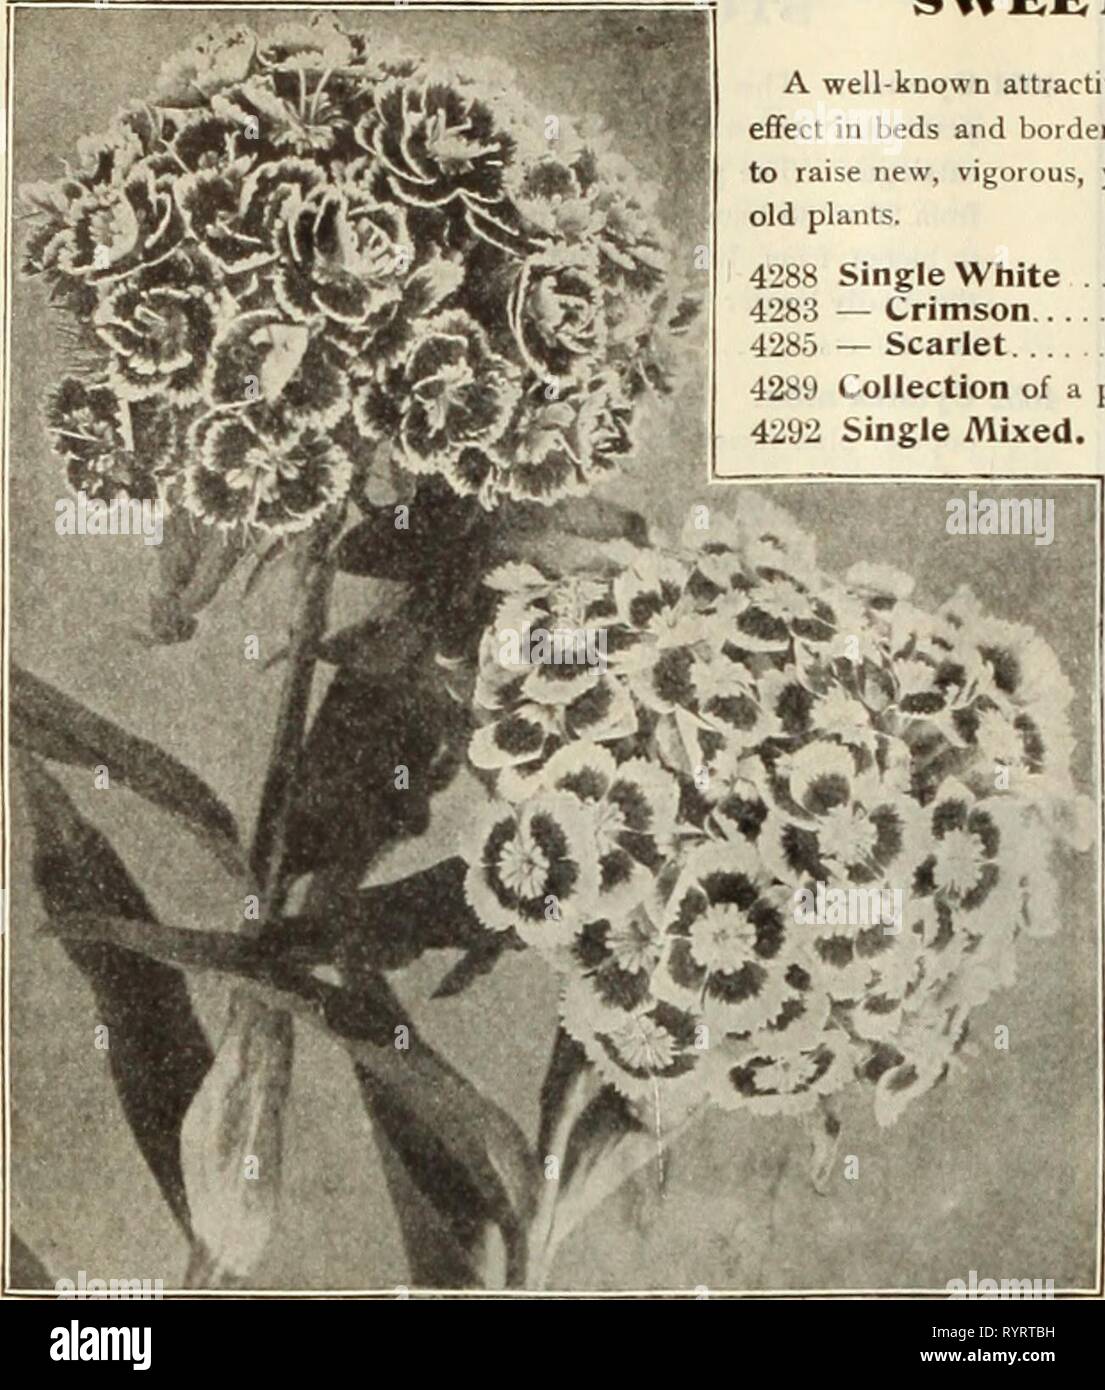 Dreer's mid-summer catalogue 1915 (1915) Dreer's mid-summer catalogue 1915 . dreersmidsummerc1915henr Year: 1915  56 HENHY A. DREER, PHILADELPHIA—FLOWER SEEDS    Double and Singlh Swekt William. TRITOMA. (Red-hot Poker, Flame Flower, or Torch Lilv.)   rp.ii PKT. 4330 Hybrida. The intrtxiiiclion of new, continuous flow- ering Tritomas has given them a prominent place among hardy bedding plants. It is not generally known that they are readily grown from seed. The seed we offer has been saved from our own collection, which is undoubtedly the finest in this country. Of course, for immediate result Stock Photo